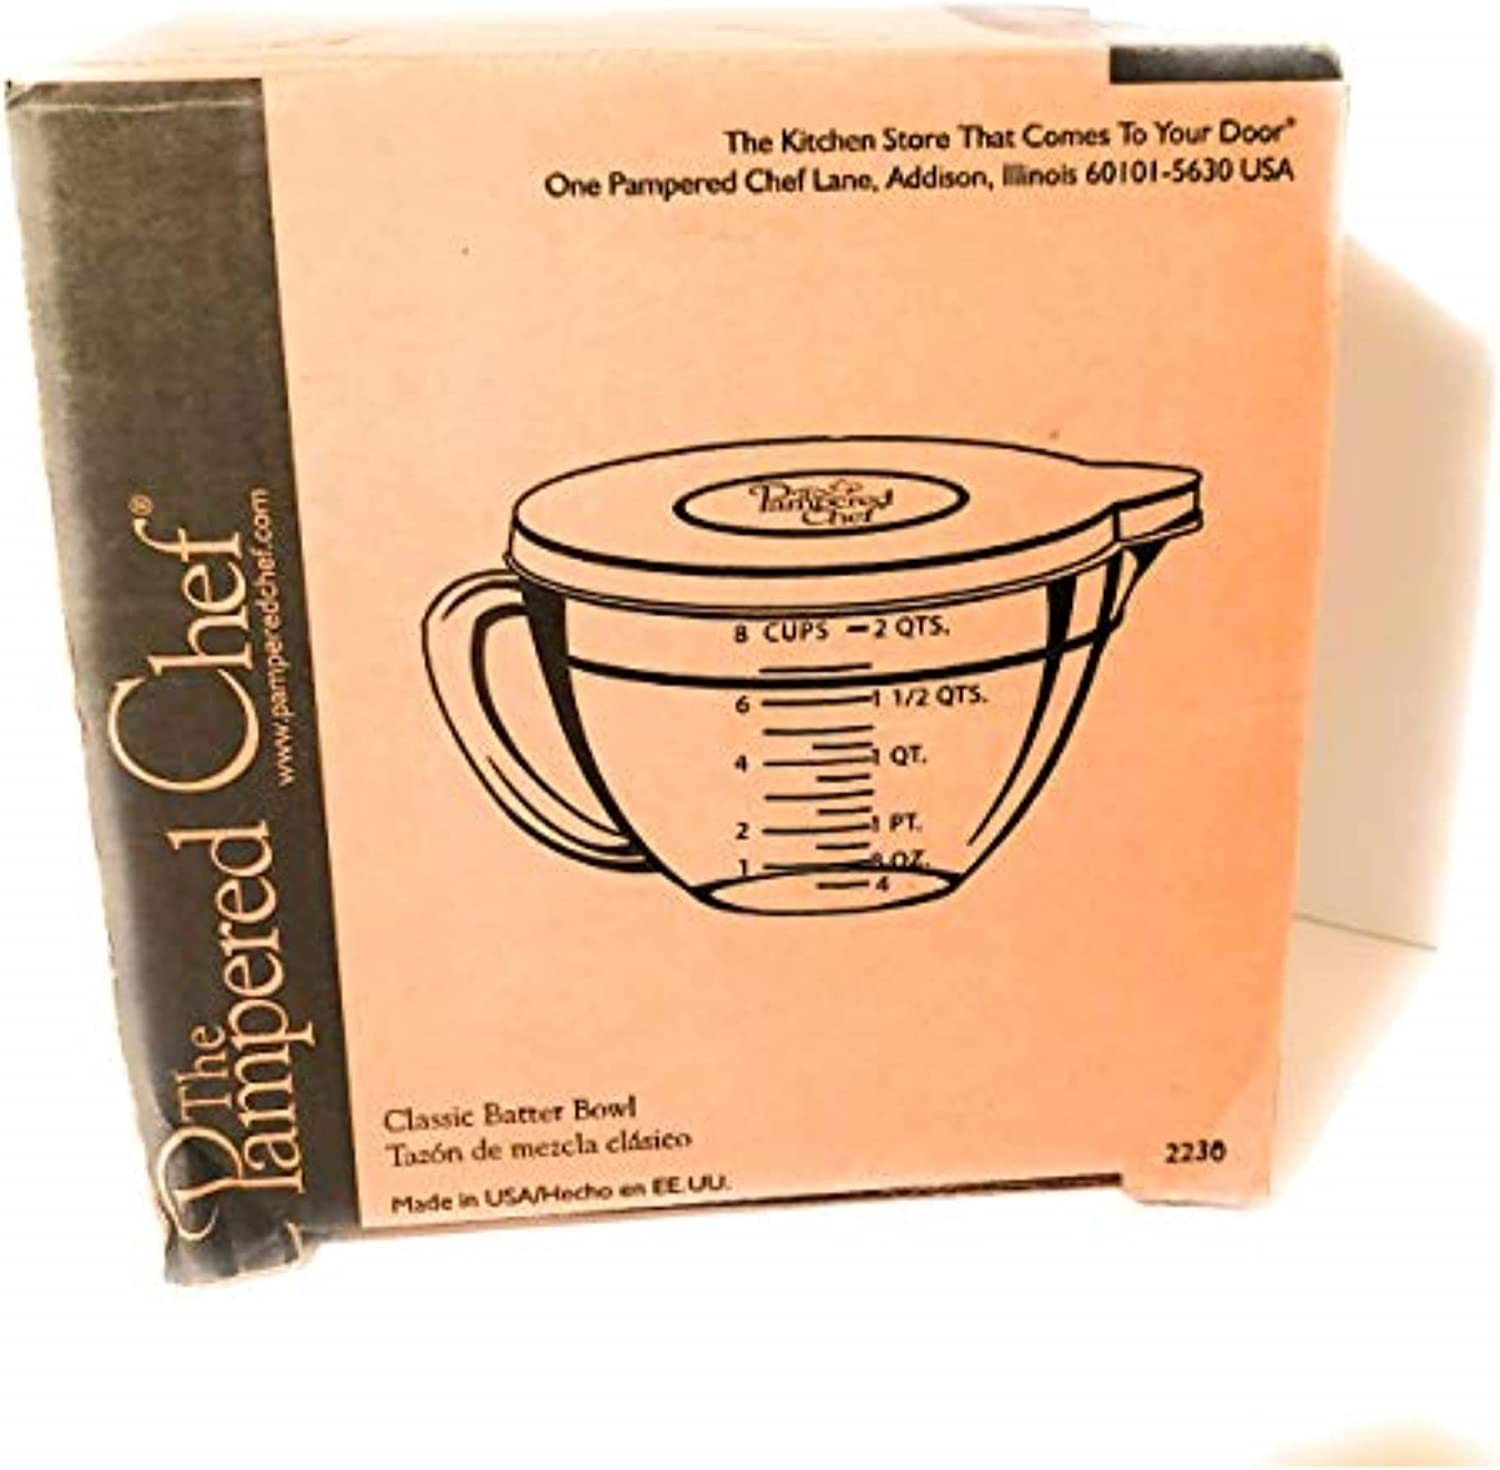 PAMPERED CHEF #2431 8 CUP GLASS CLASSIC BATTER BOWL NEW 2013 STYLE WITH LID